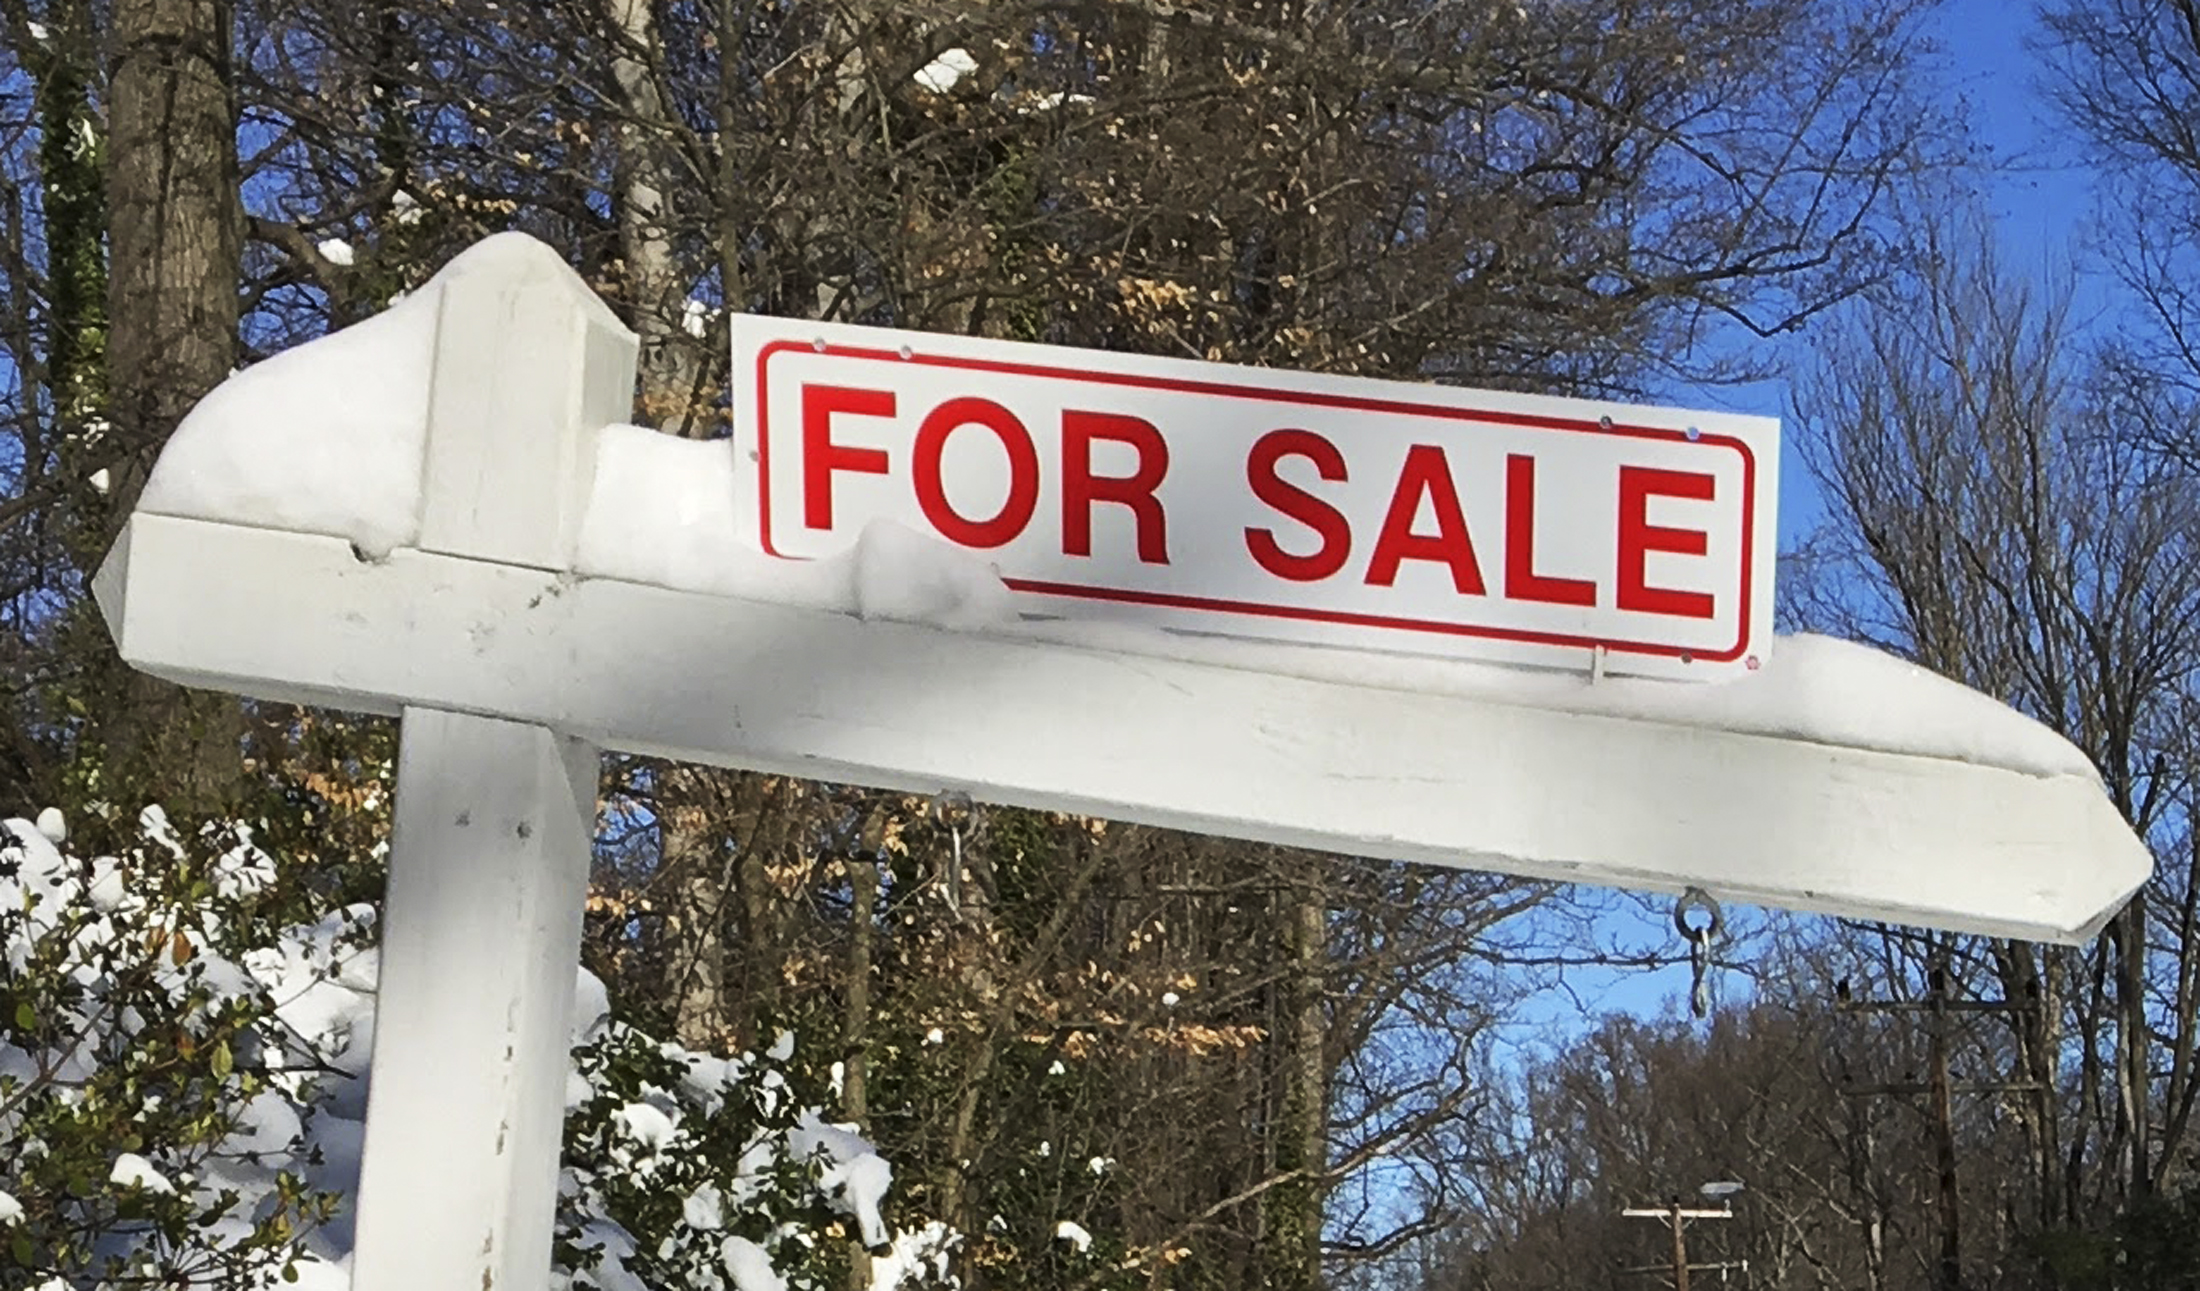 A house-for-sale sign inside the Washington DC Beltway in Annandale Virginia